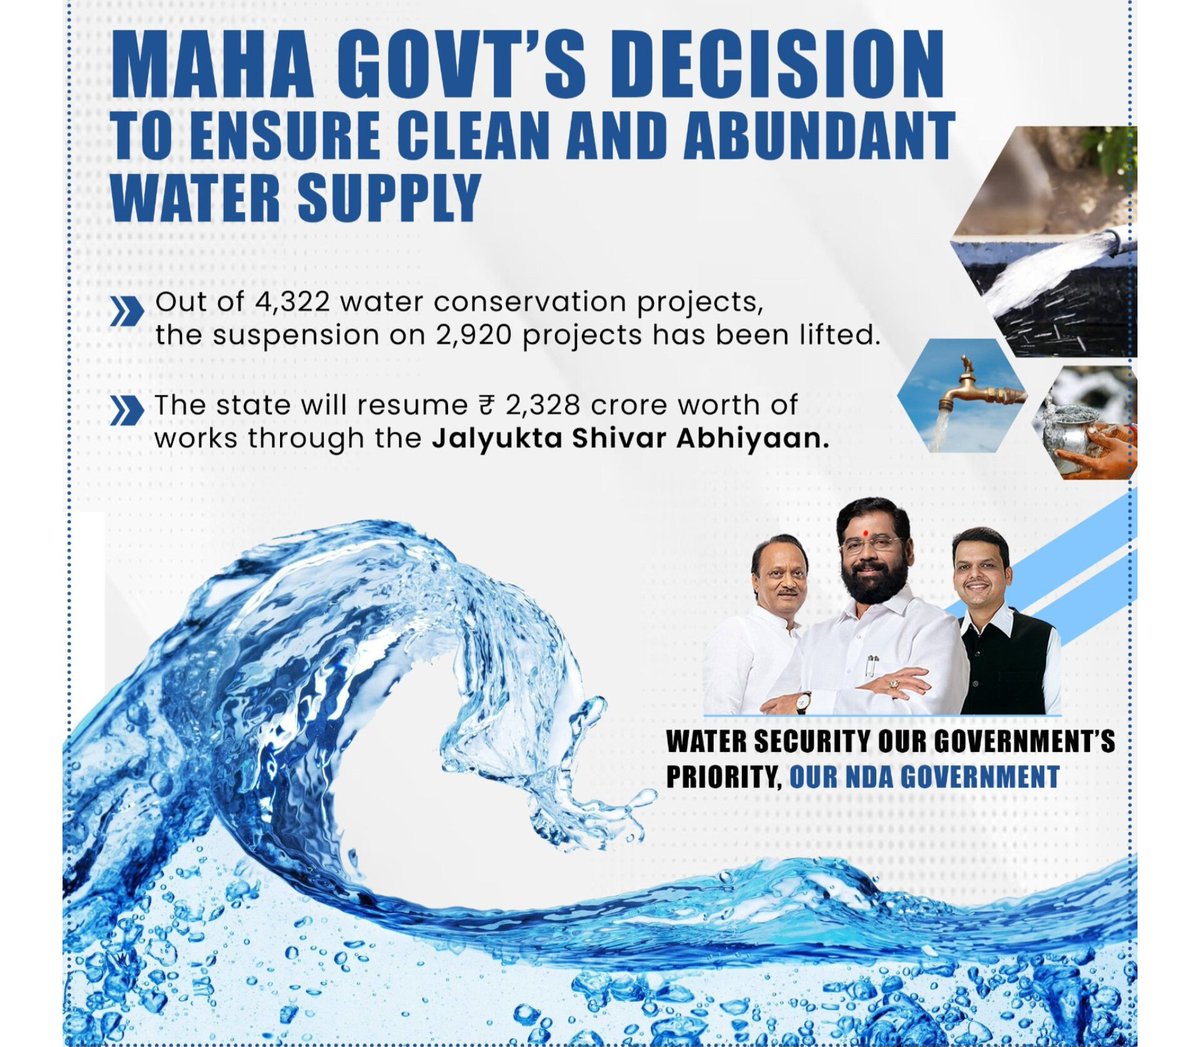 NDA Govt in Maharashtra is making every effort to ensure clean and abundant water supply in the state. Out of 4332 water conservation projects, the suspension on 2920 projects has been lifted. The state will resume ₹2328 crore worth of works through the Jalyukt Shivar Abhiyan.